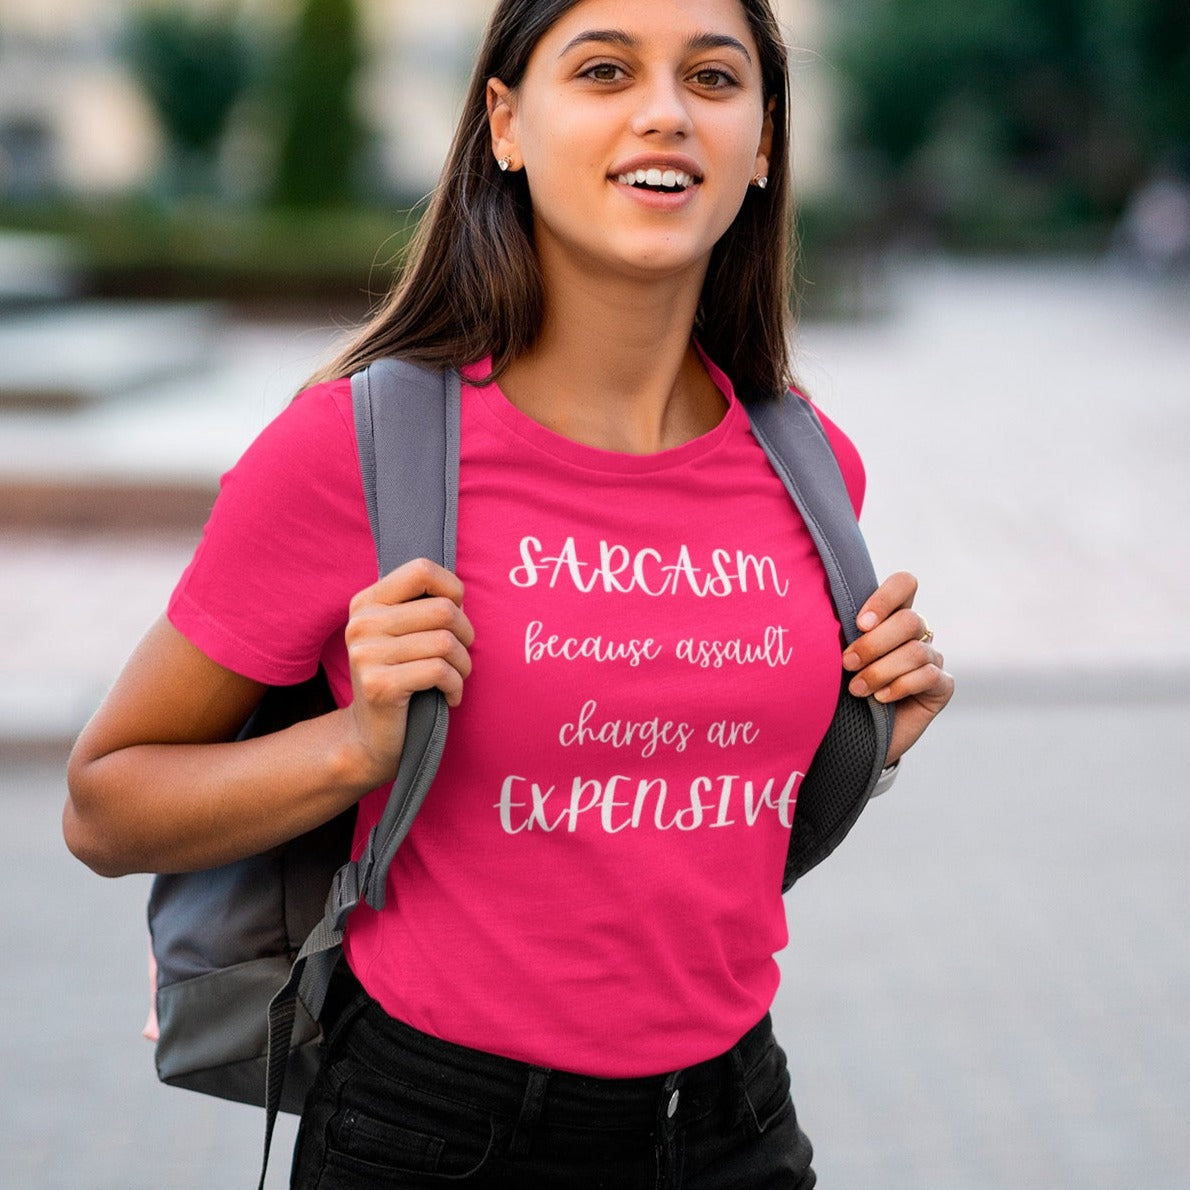 sarcasm-because-assault-charges-are-expensive-berry-t-shirt-women-funny-sarcastic-mockup-featuring-a-young-female-student